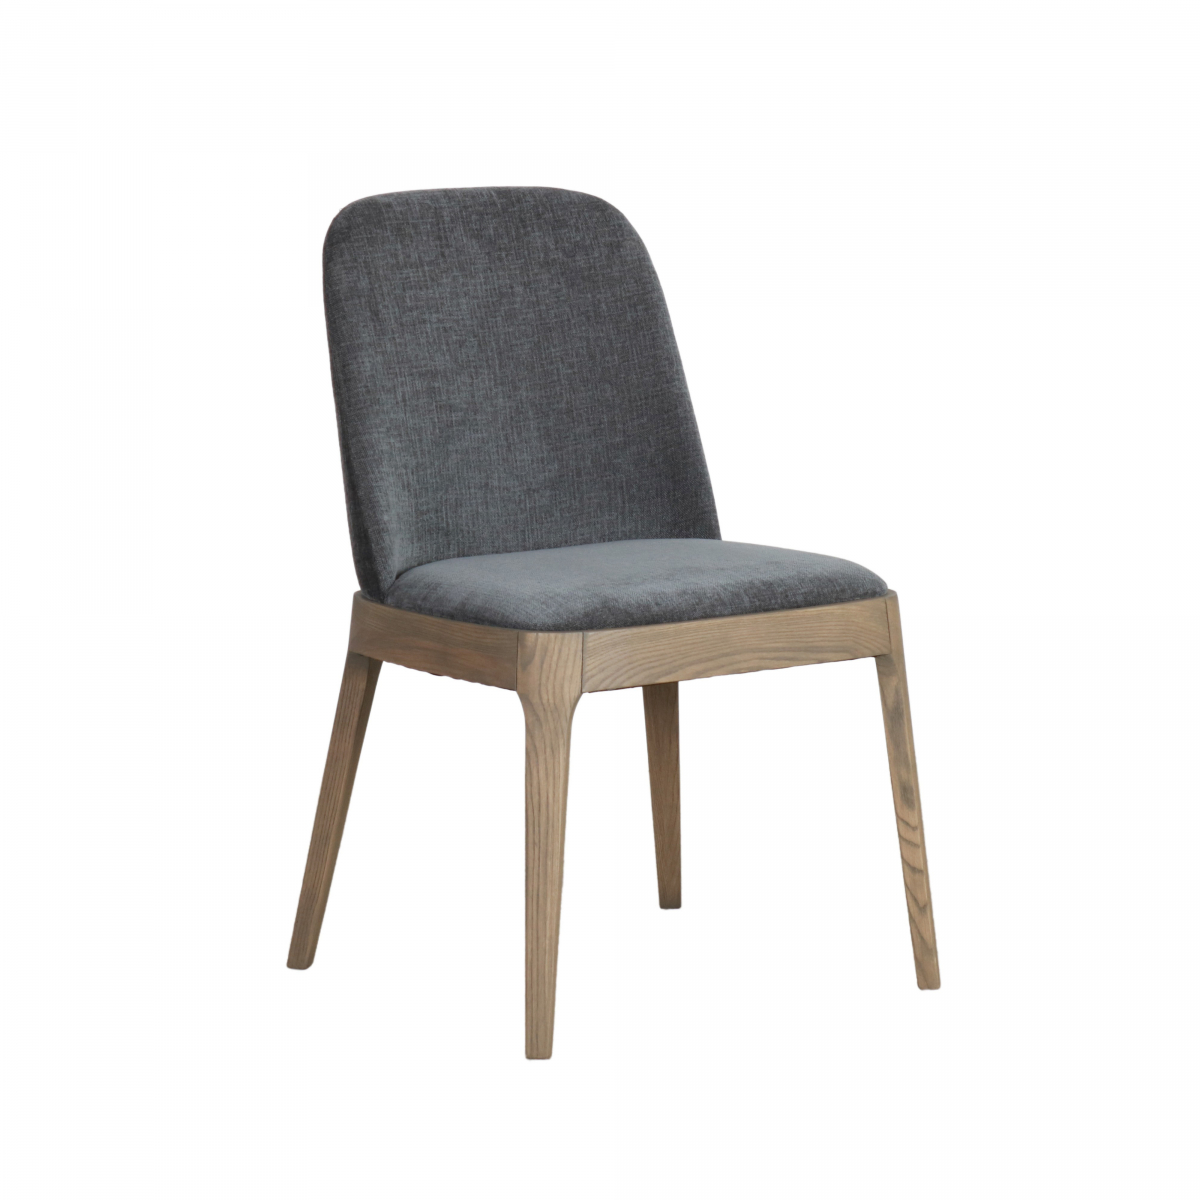 Modern upholstered dining chair in charcoal